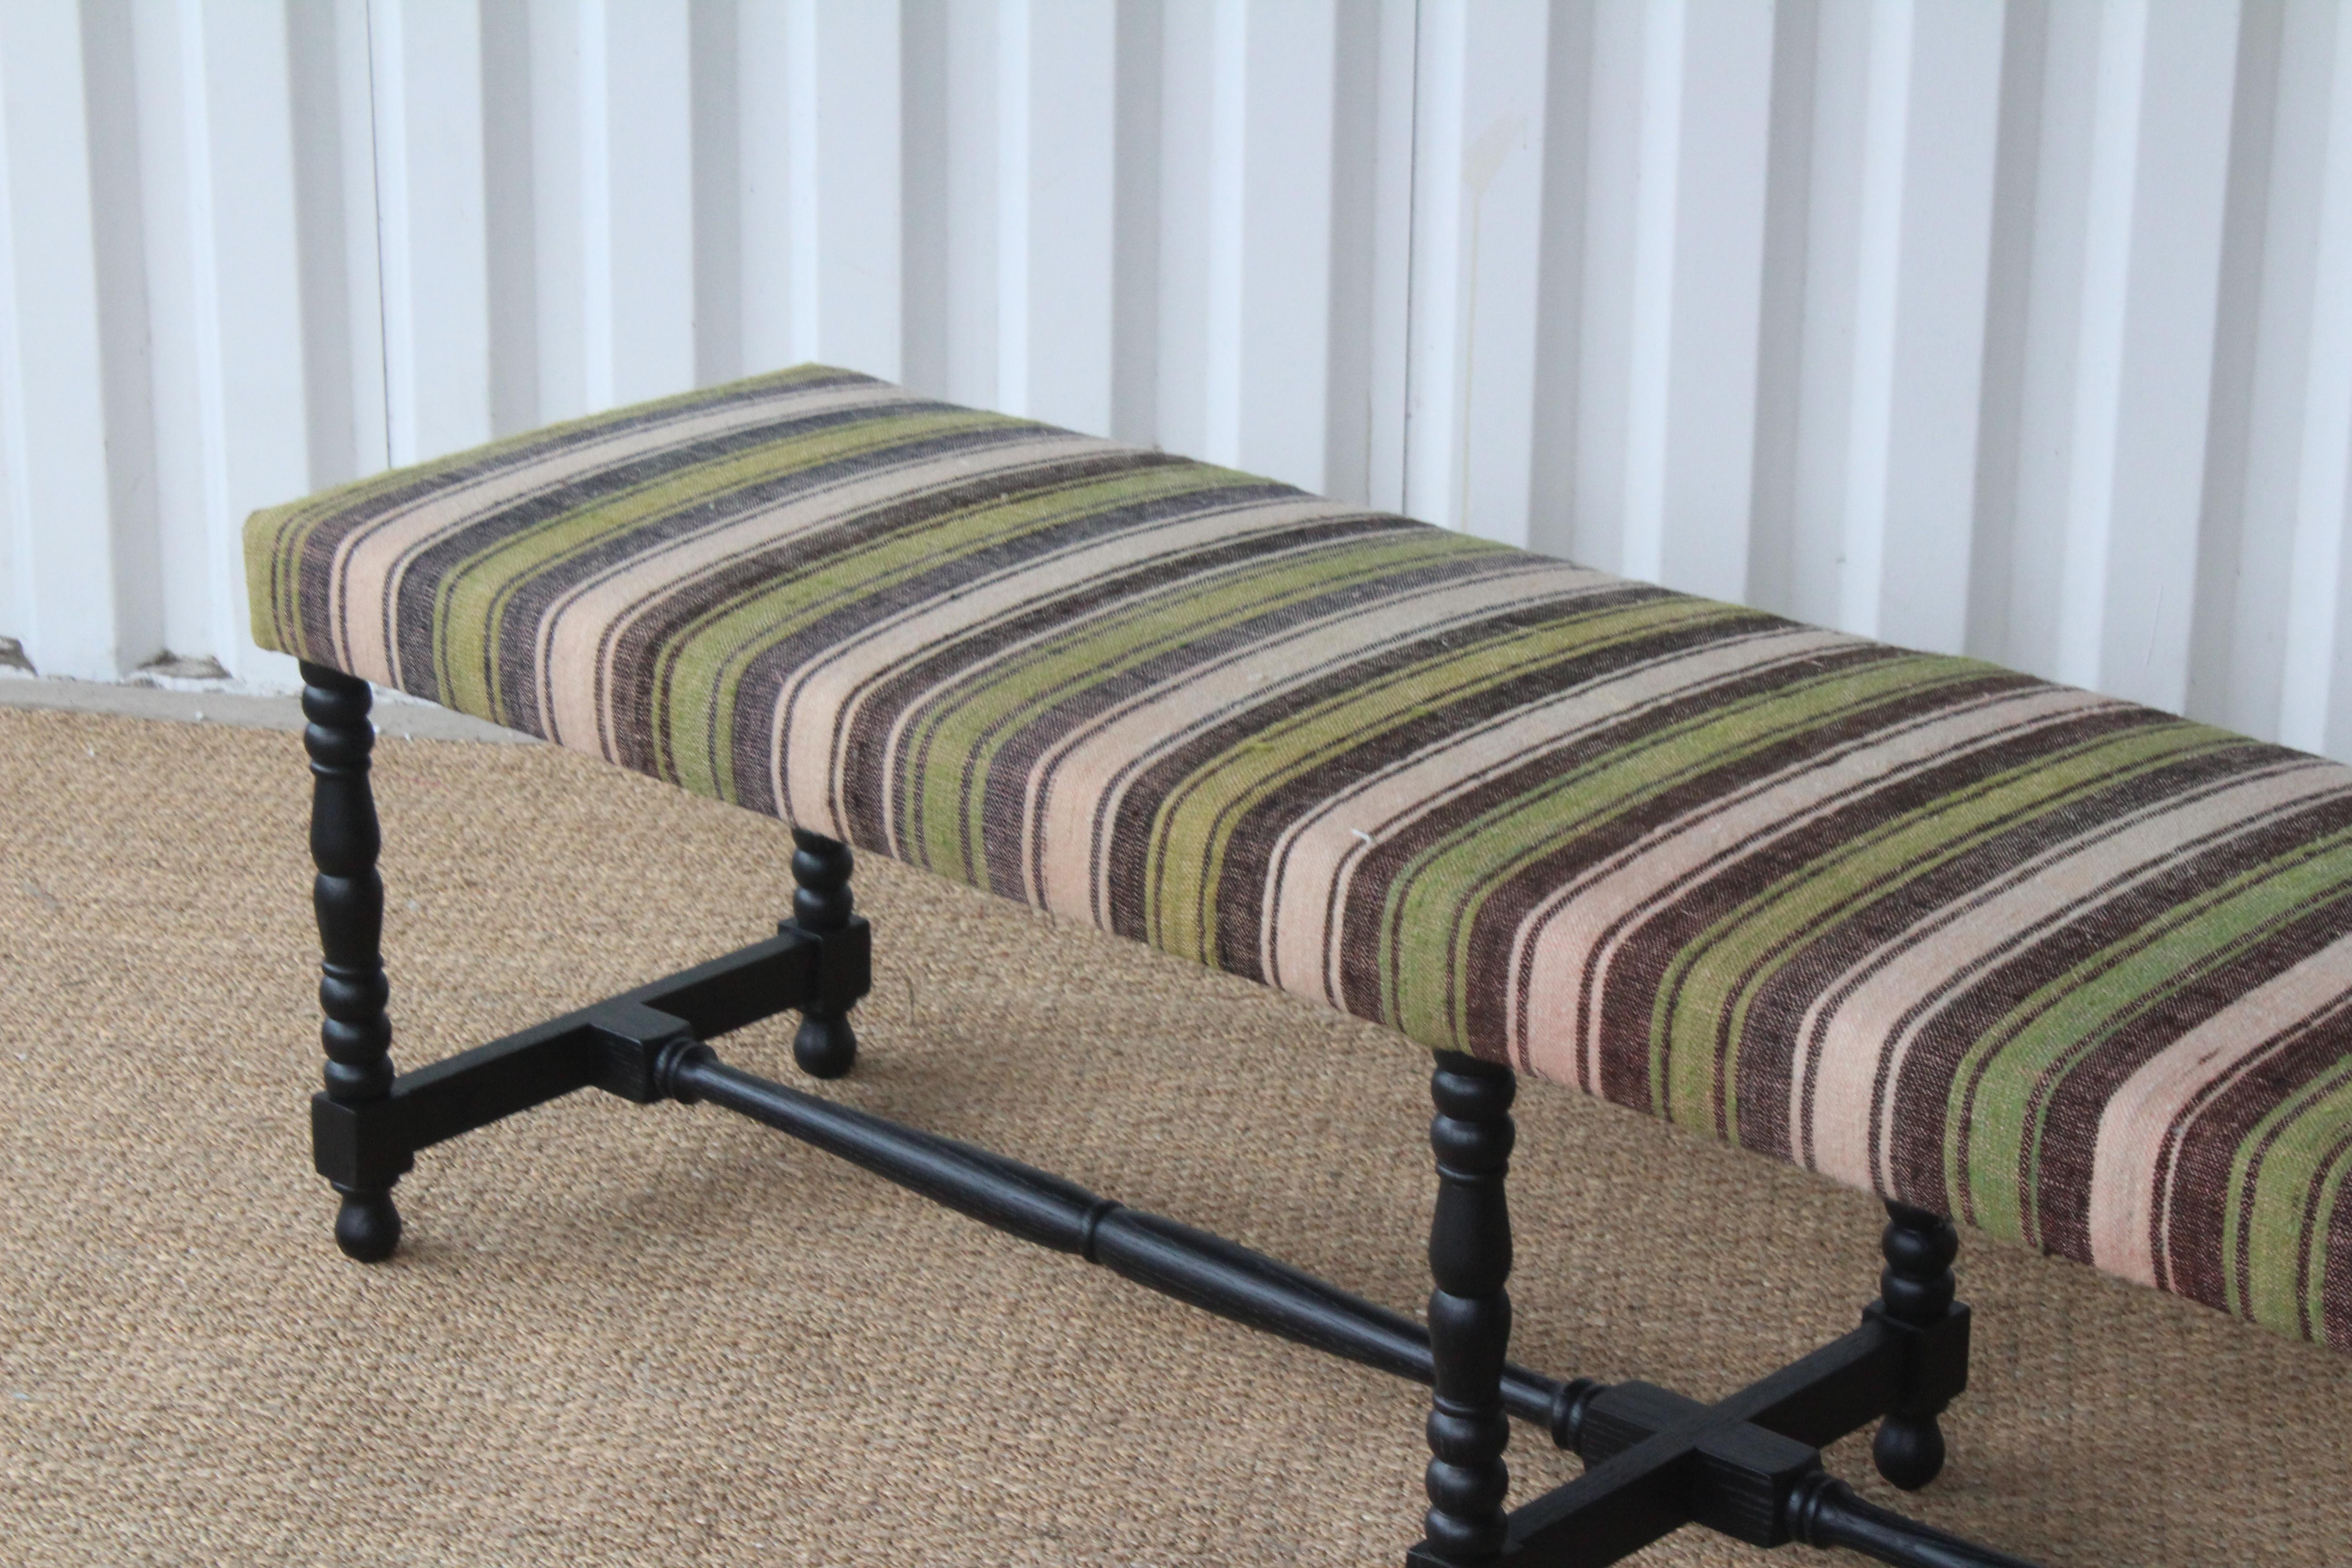 Contemporary Oak Bench Upholstered in a Vintage Wool Striped Turkish Kilim